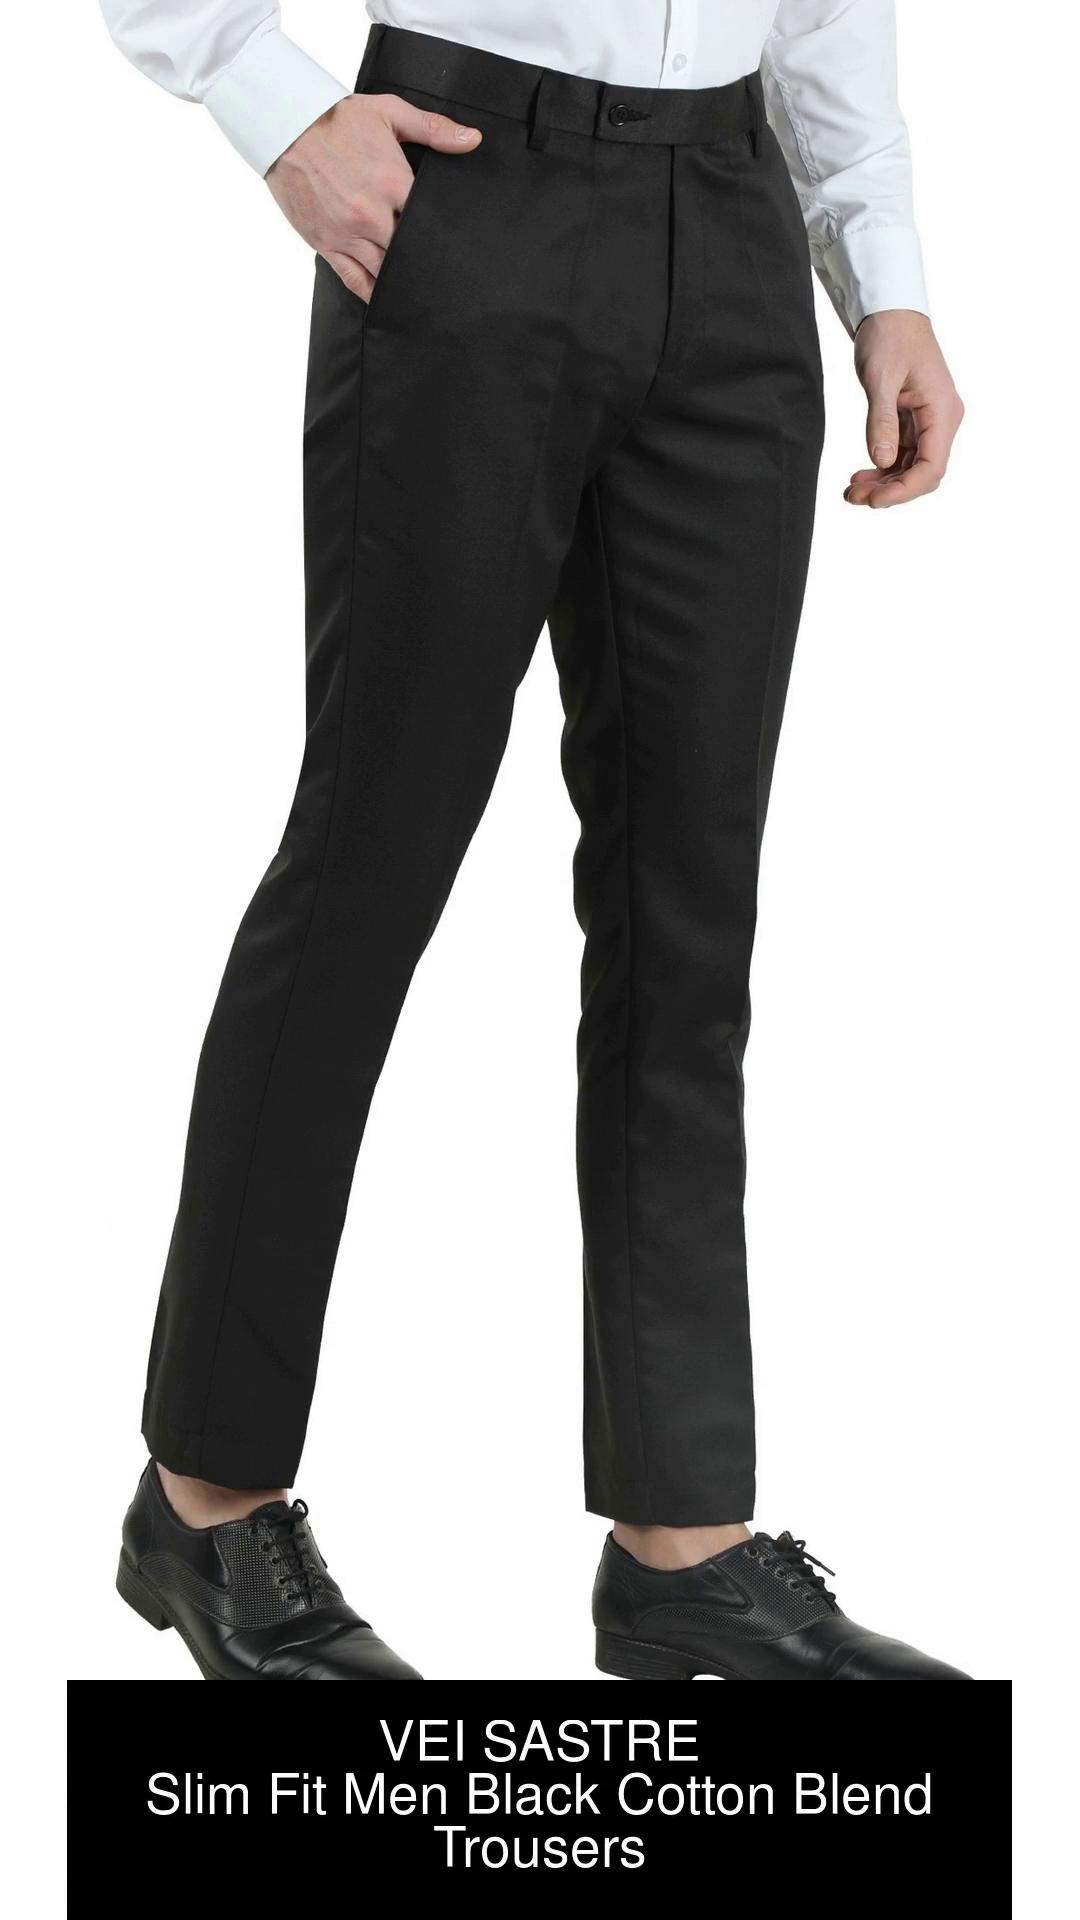 Narrow Fit Trousers - Buy Narrow Fit Trousers online in India